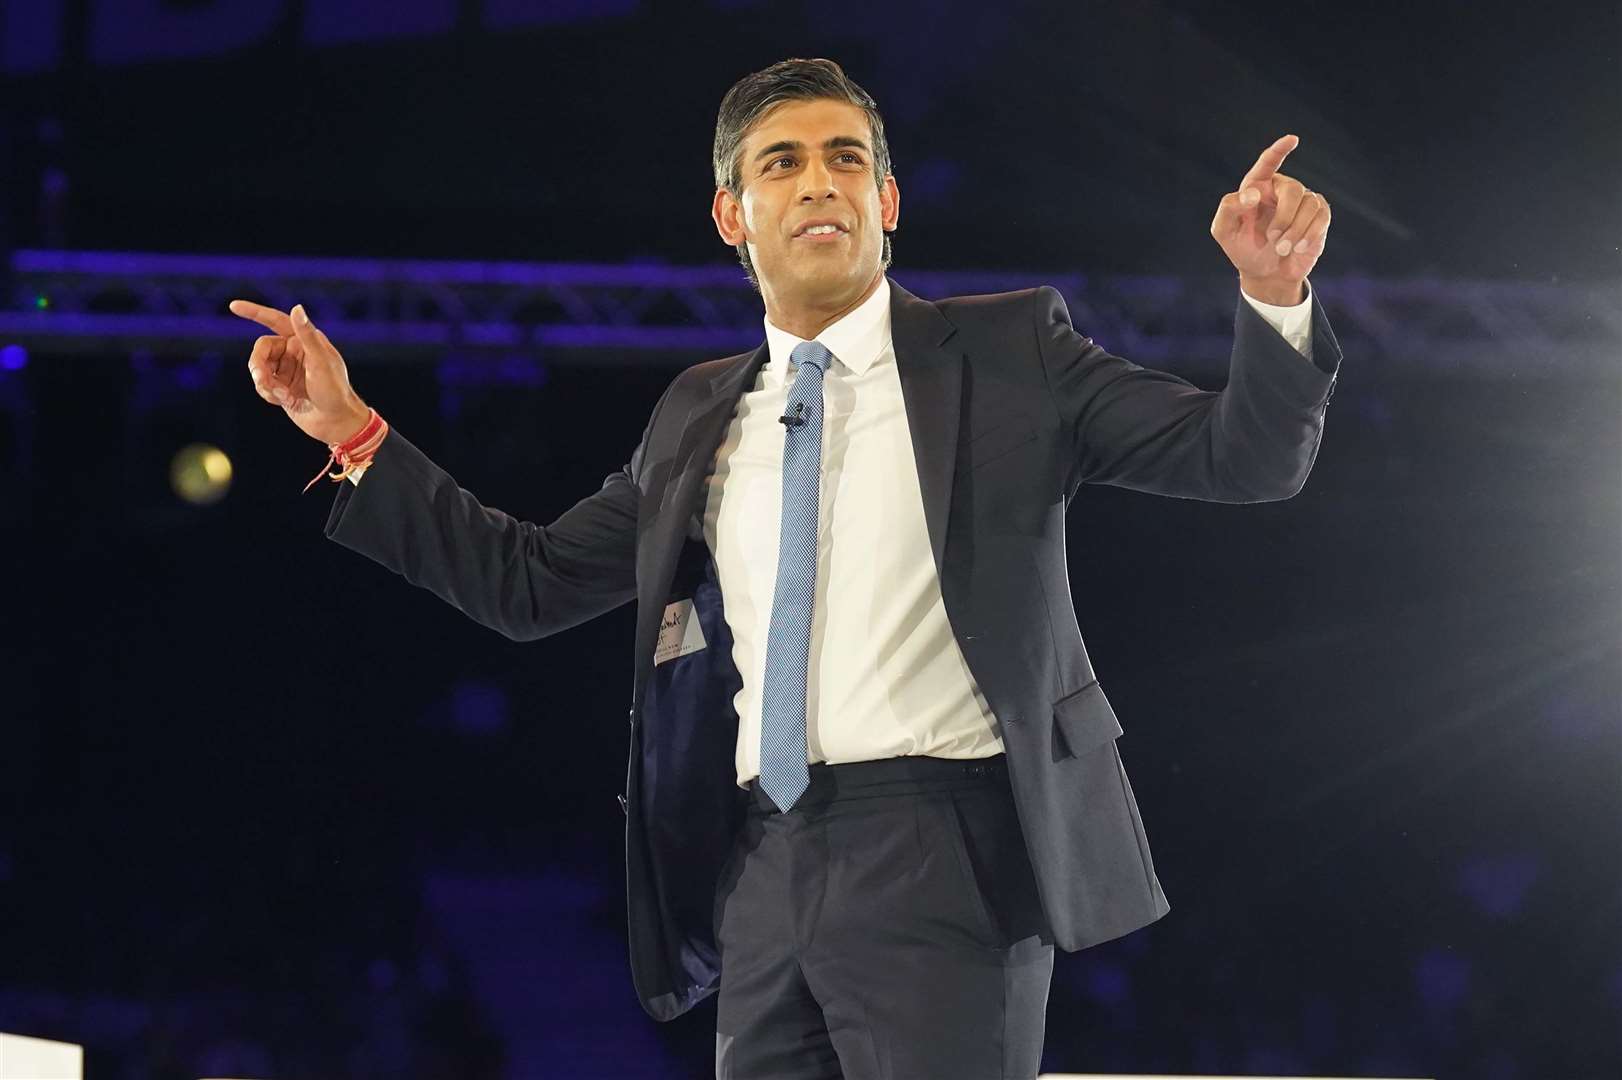 Rishi Sunak during the hustings event at Wembley Arena, London (Stefan Rousseau/PA)